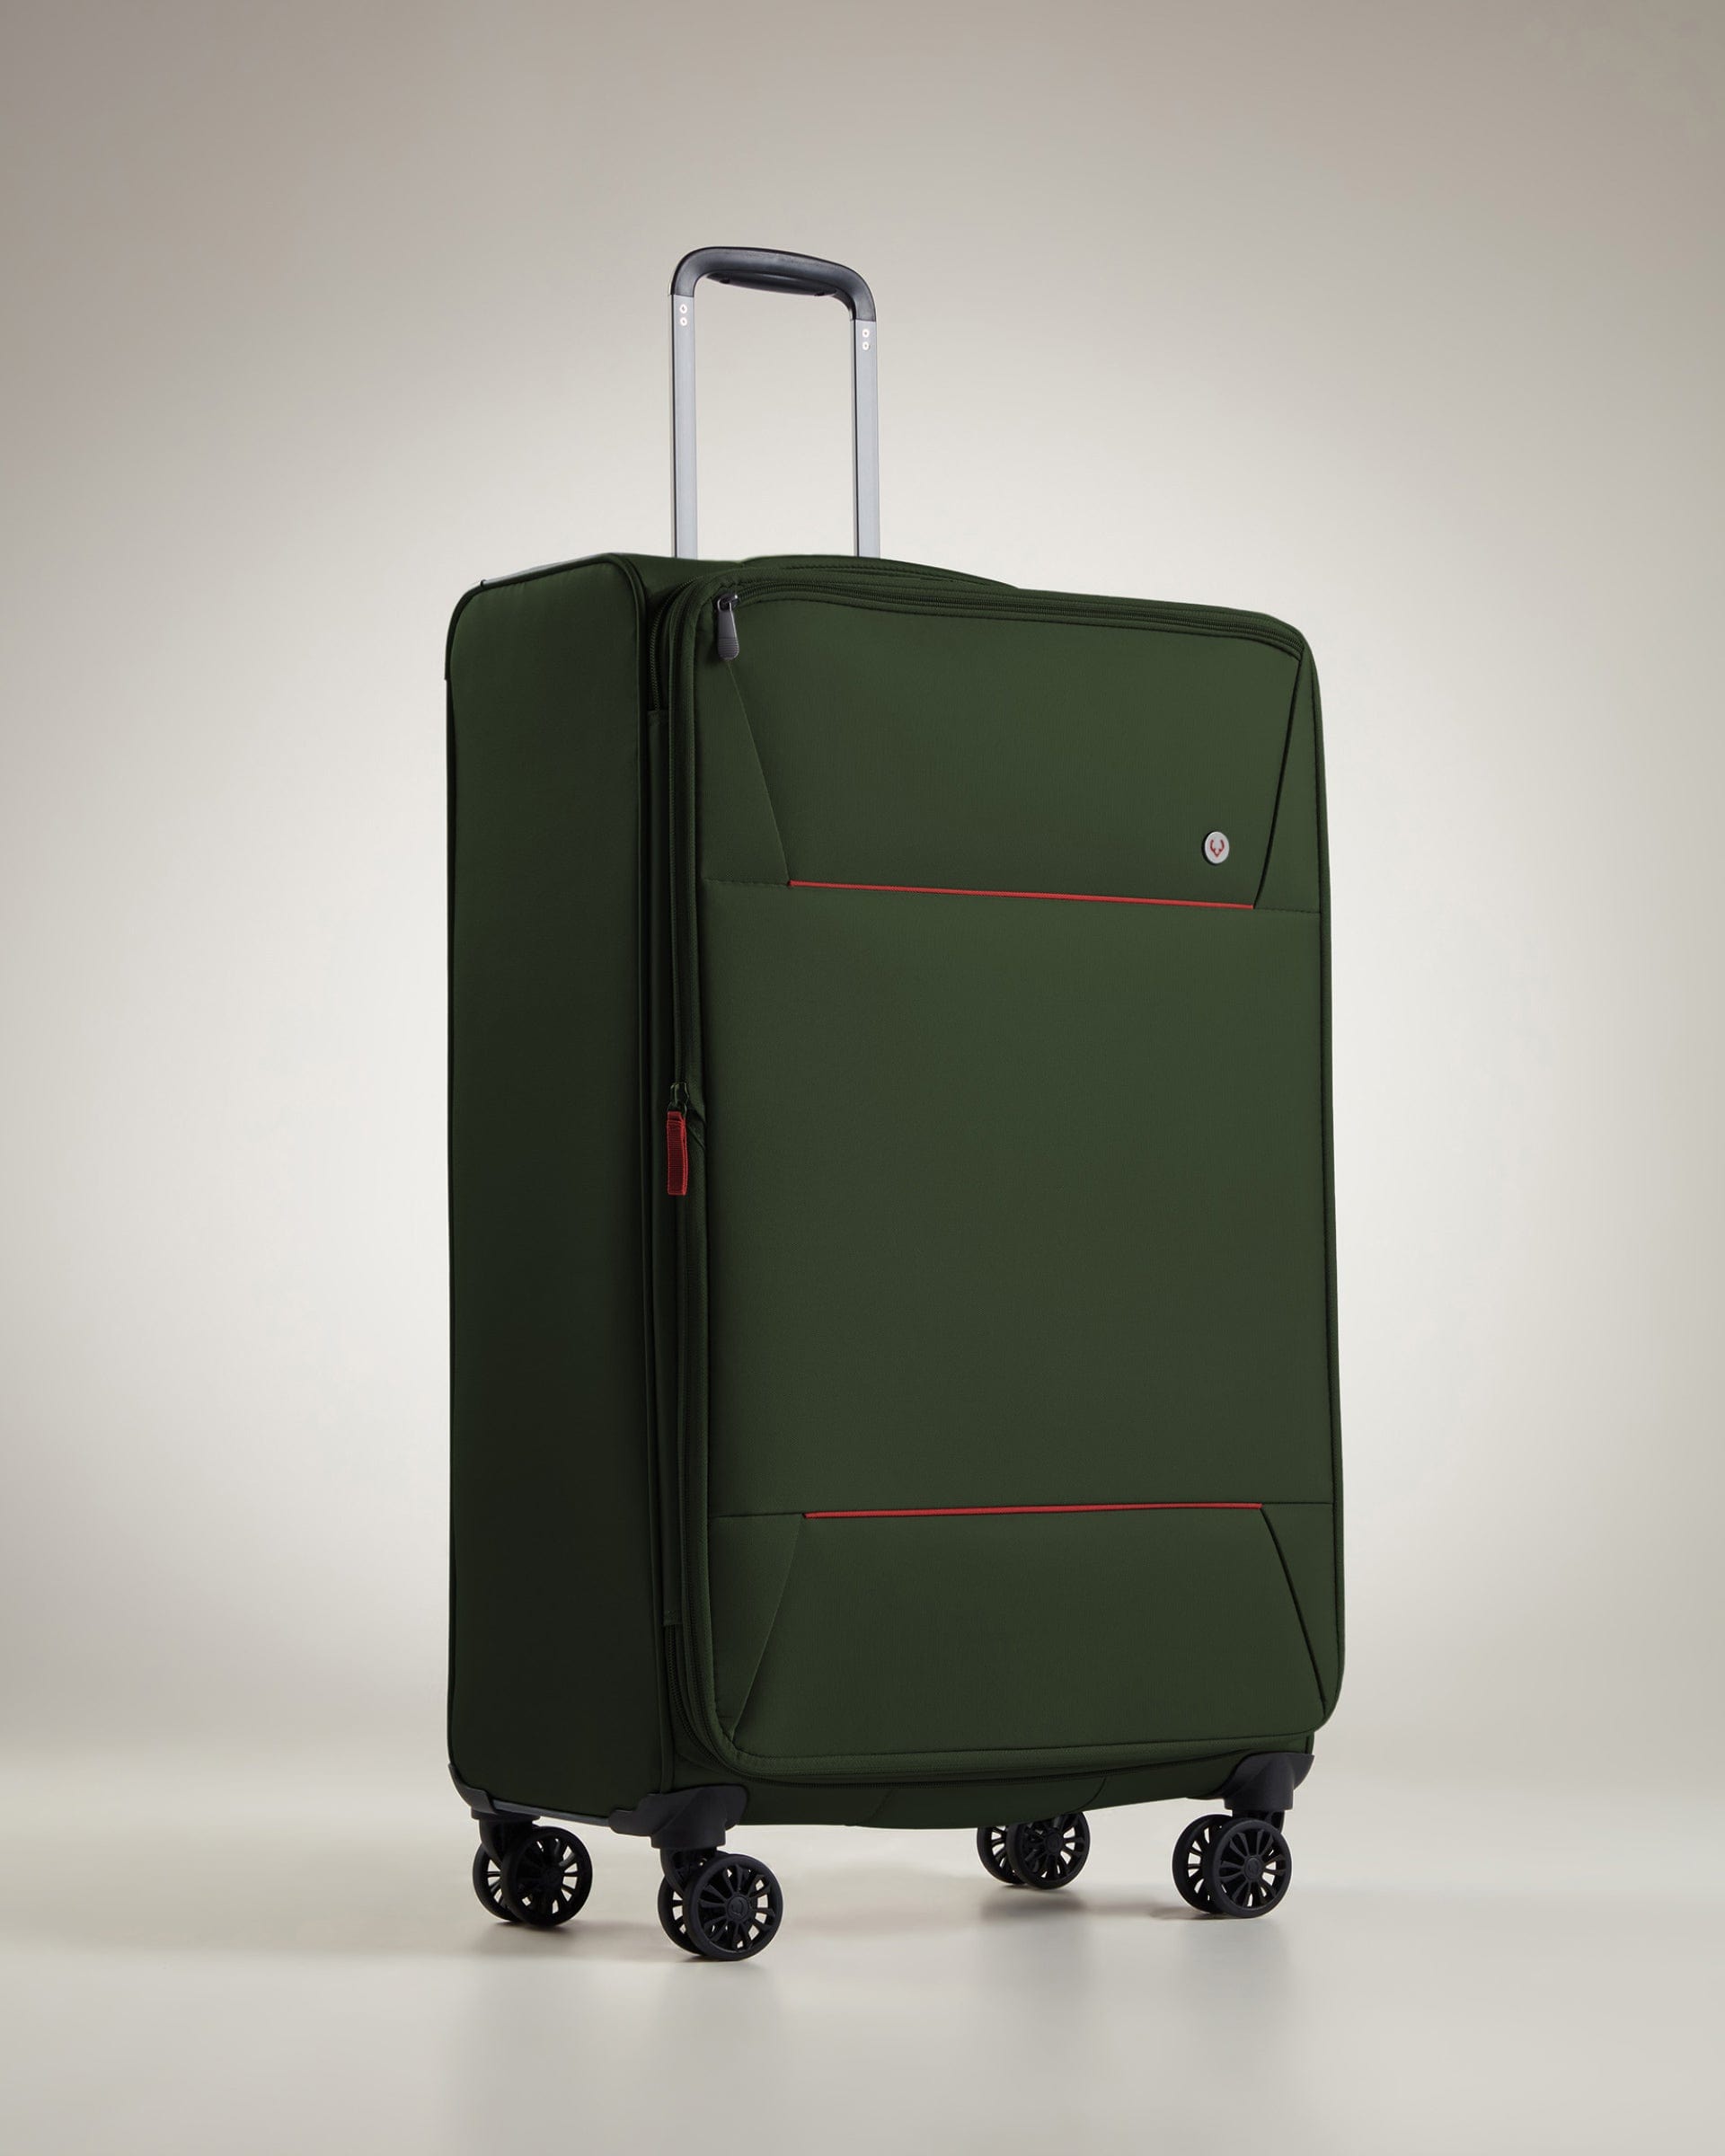 View Antler Brixham Large Suitcase In Canopy Green Size 81 x 465 x 31 cm information